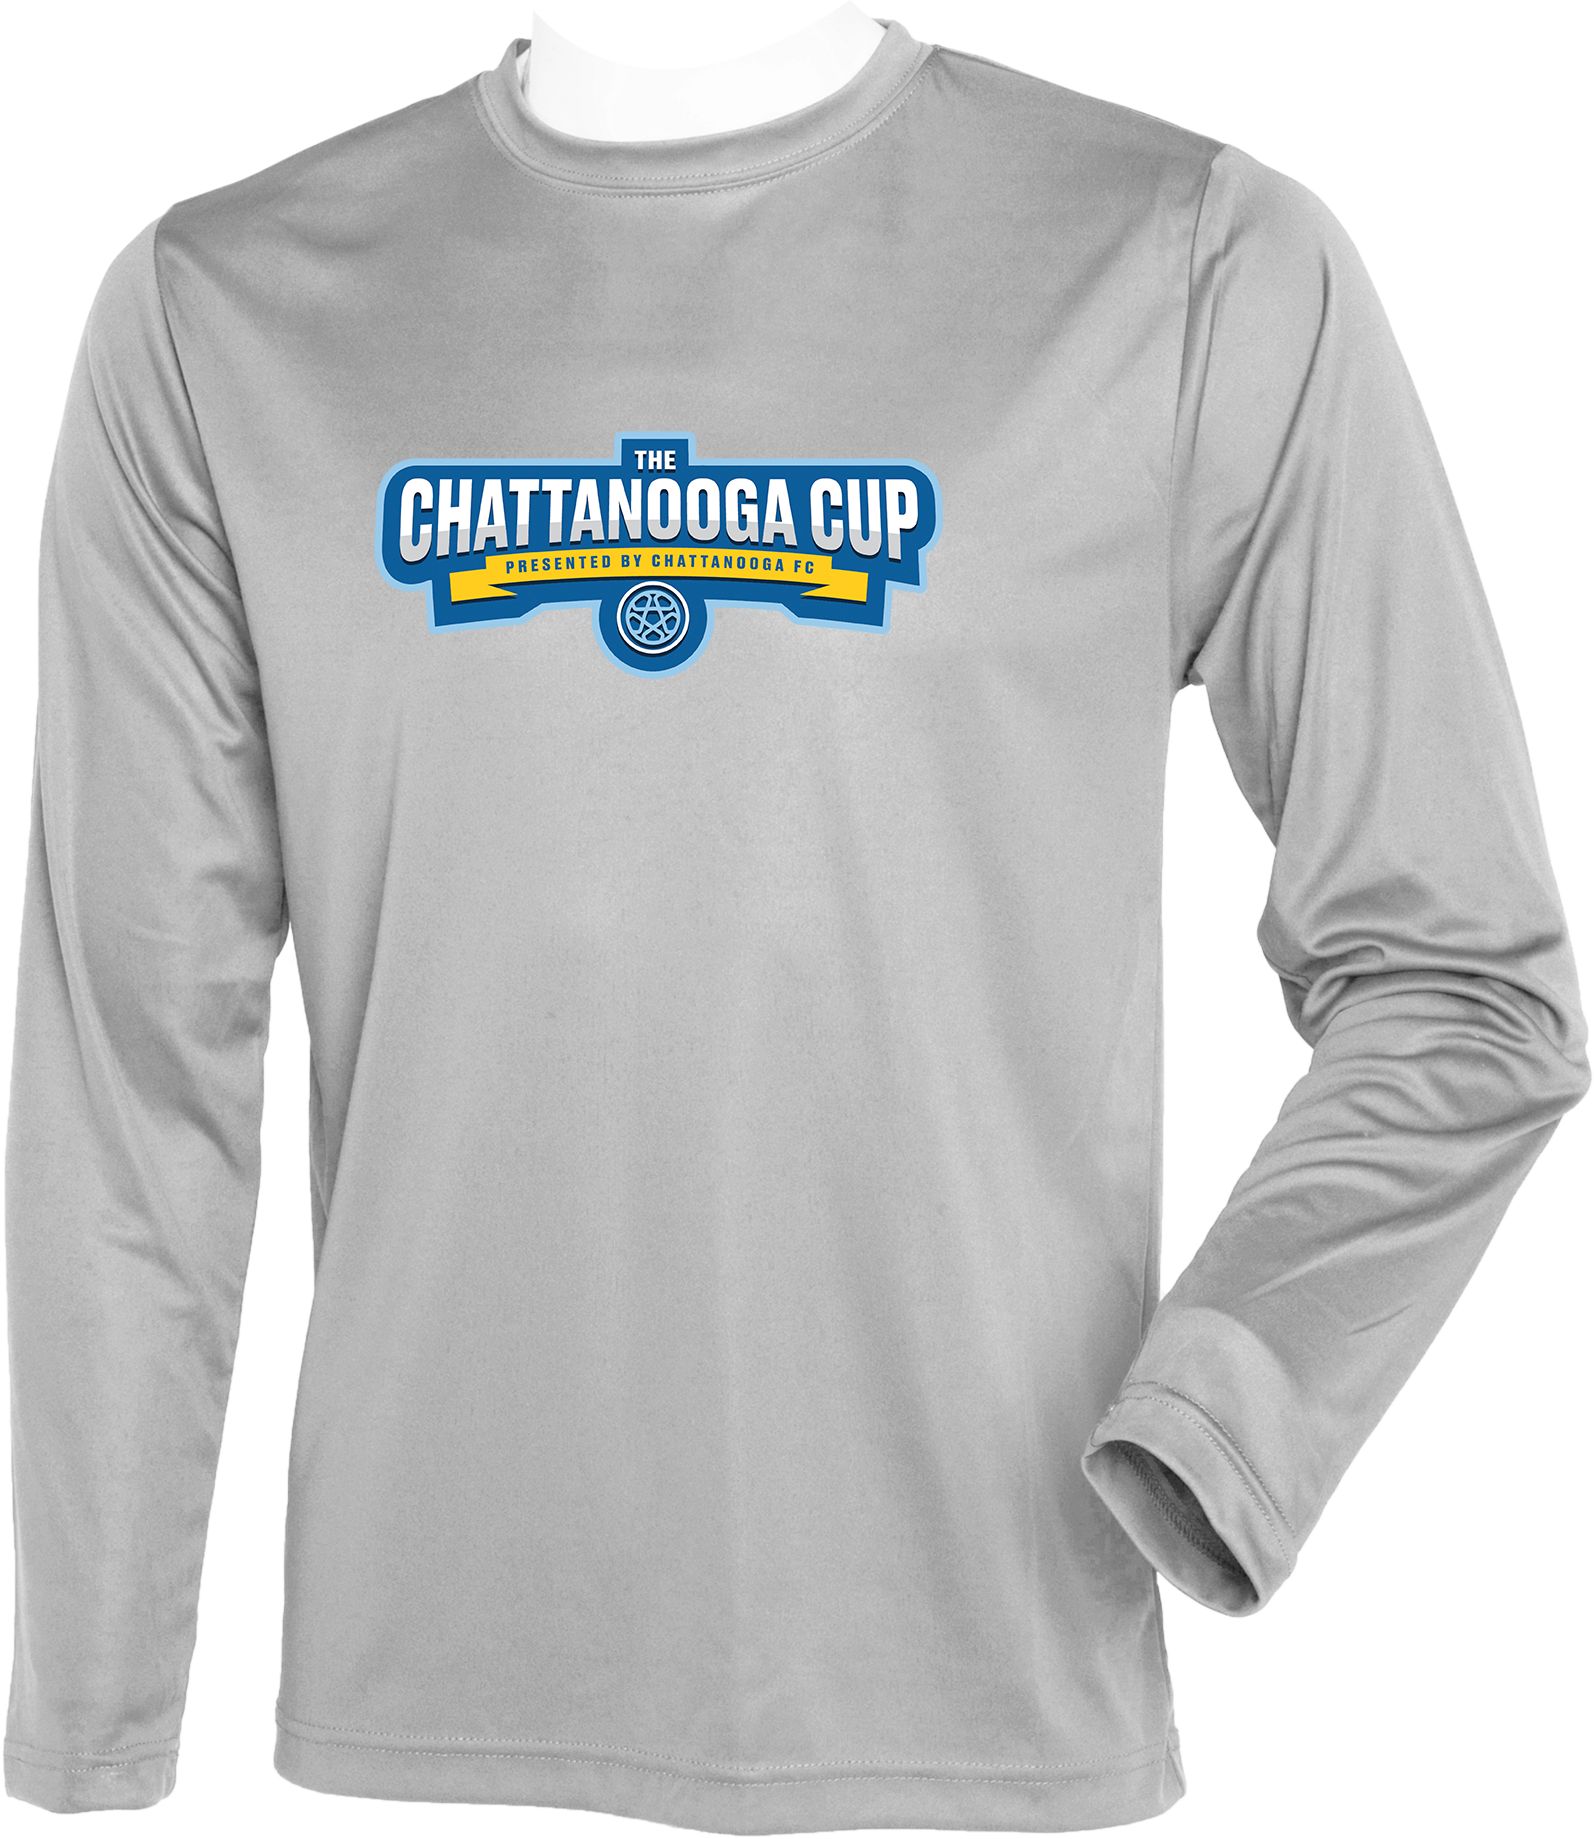 PERFORMANCE SHIRTS - 2023 The Chattanooga Cup